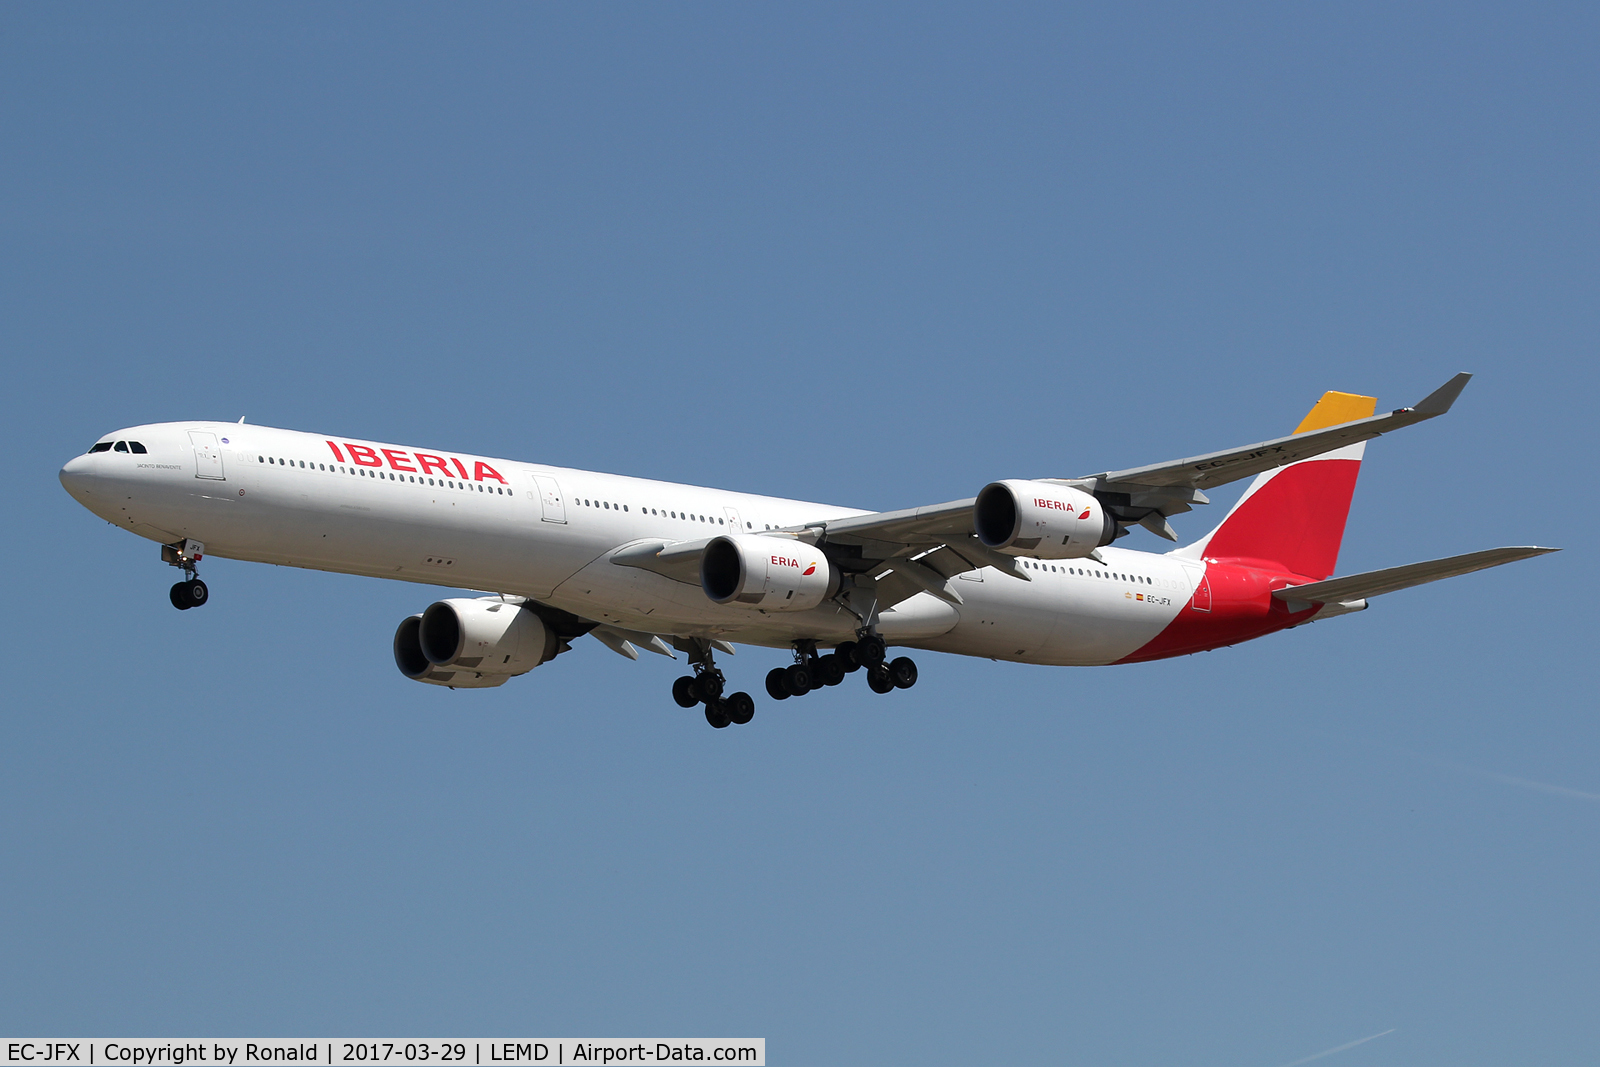 EC-JFX, 2005 Airbus A340-642 C/N 672, at mad